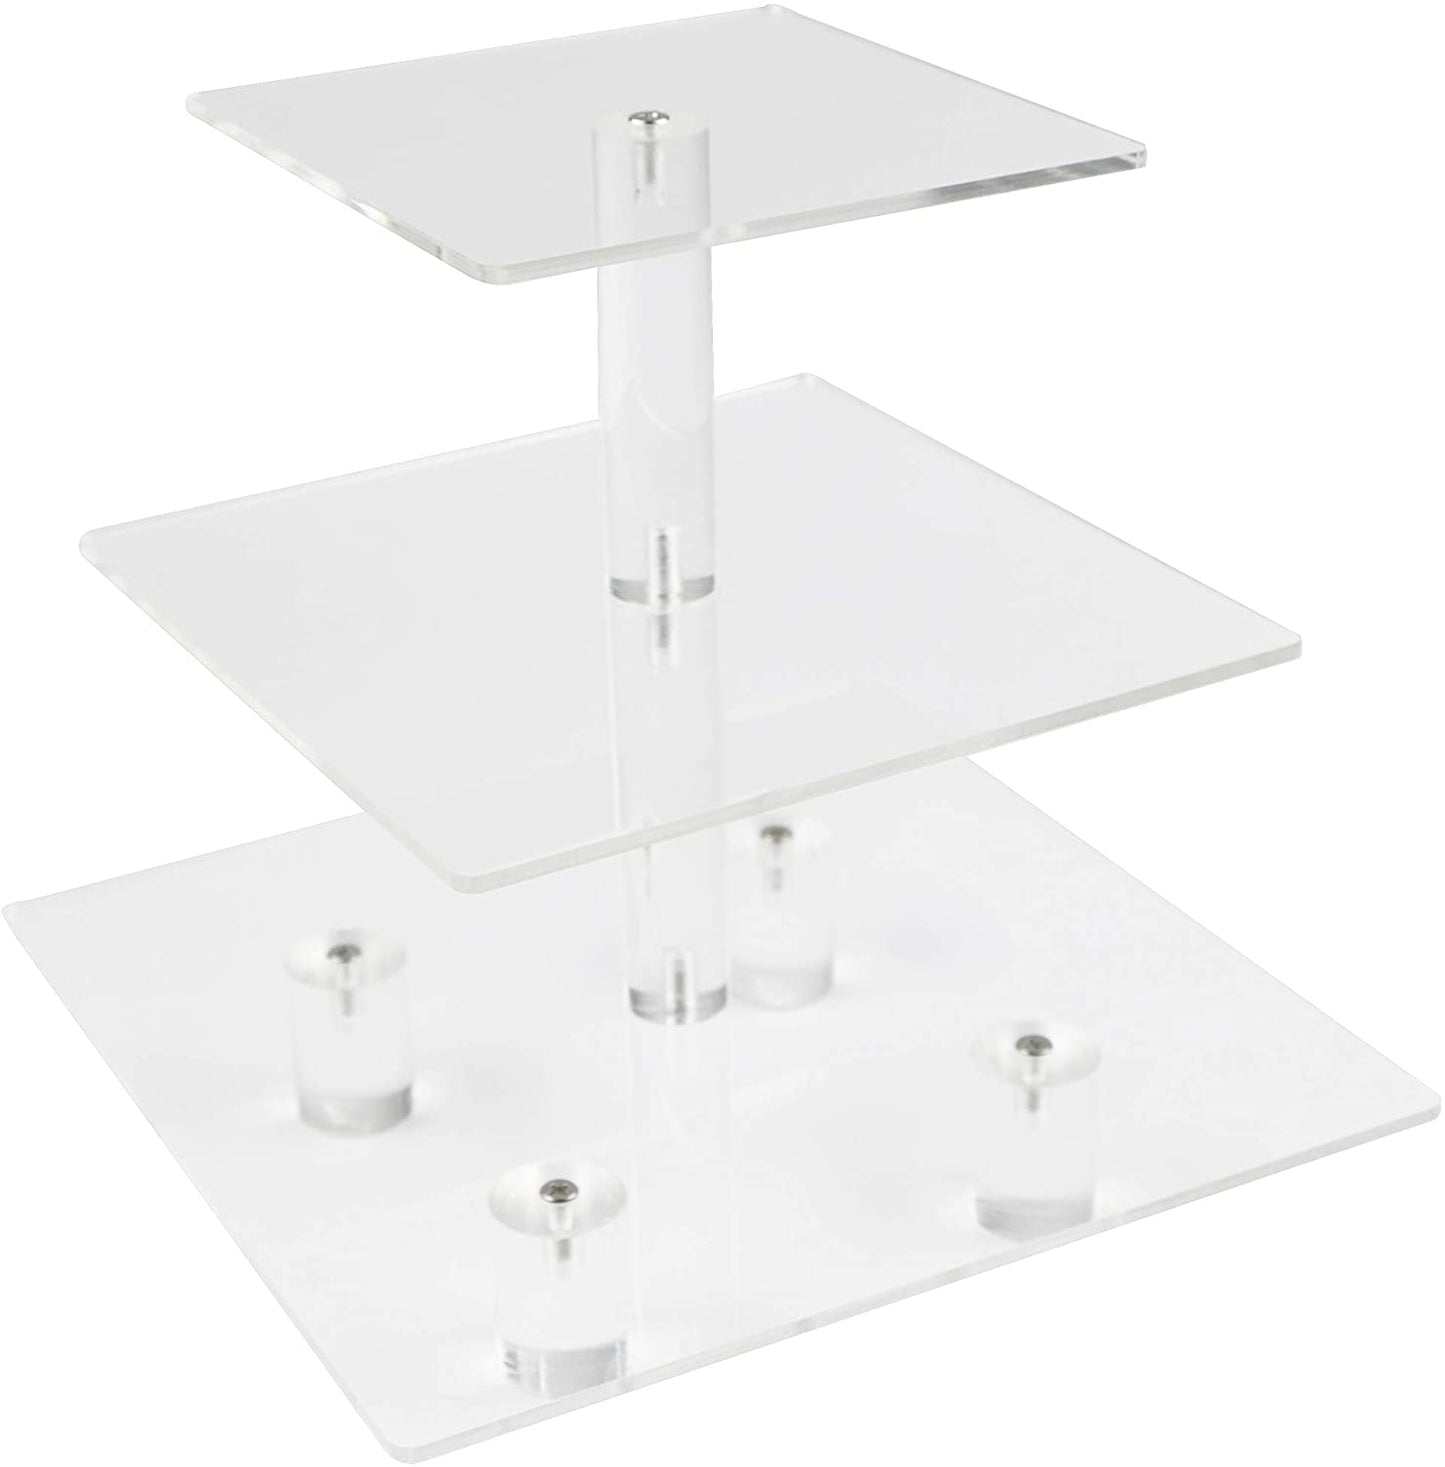 HMROVOOM Square Acrylic Cupcake Stand Display Rack Holder (3 Tier Square with base (4" between 2 layers))